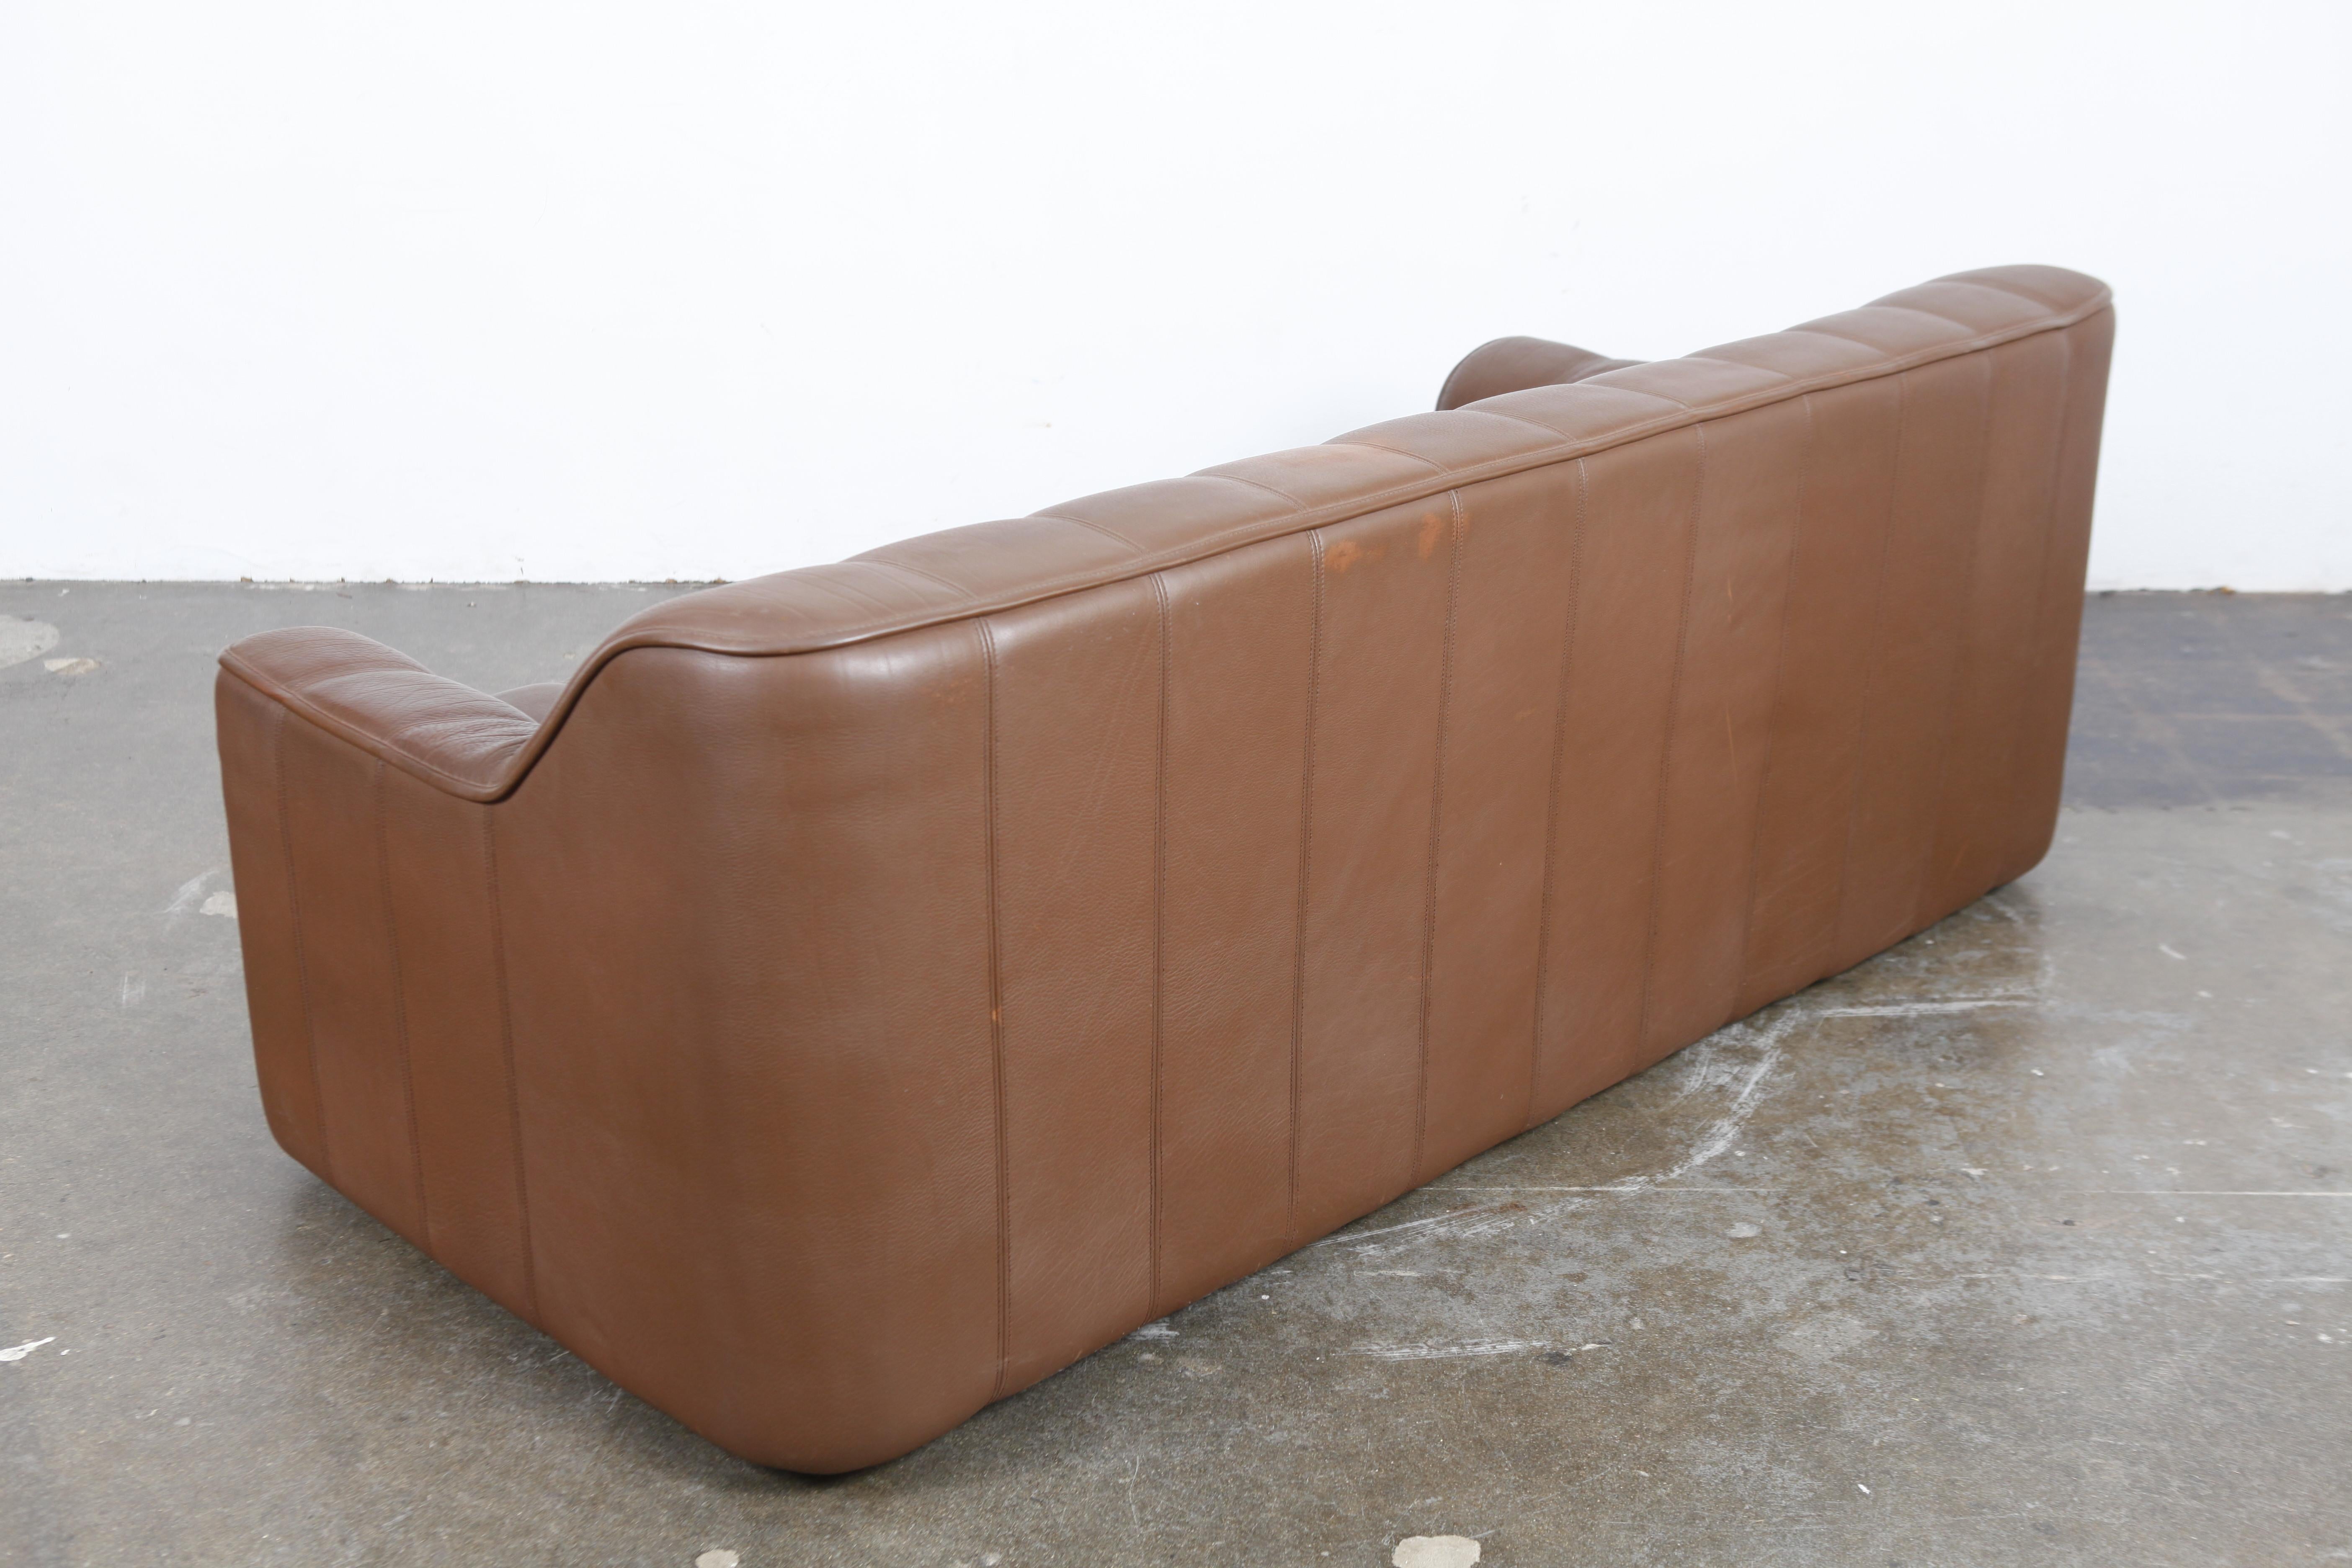 1970s De Sede Leather 3-Seat Sofa 'Model DS 44' from Switzerland In Good Condition For Sale In North Hollywood, CA